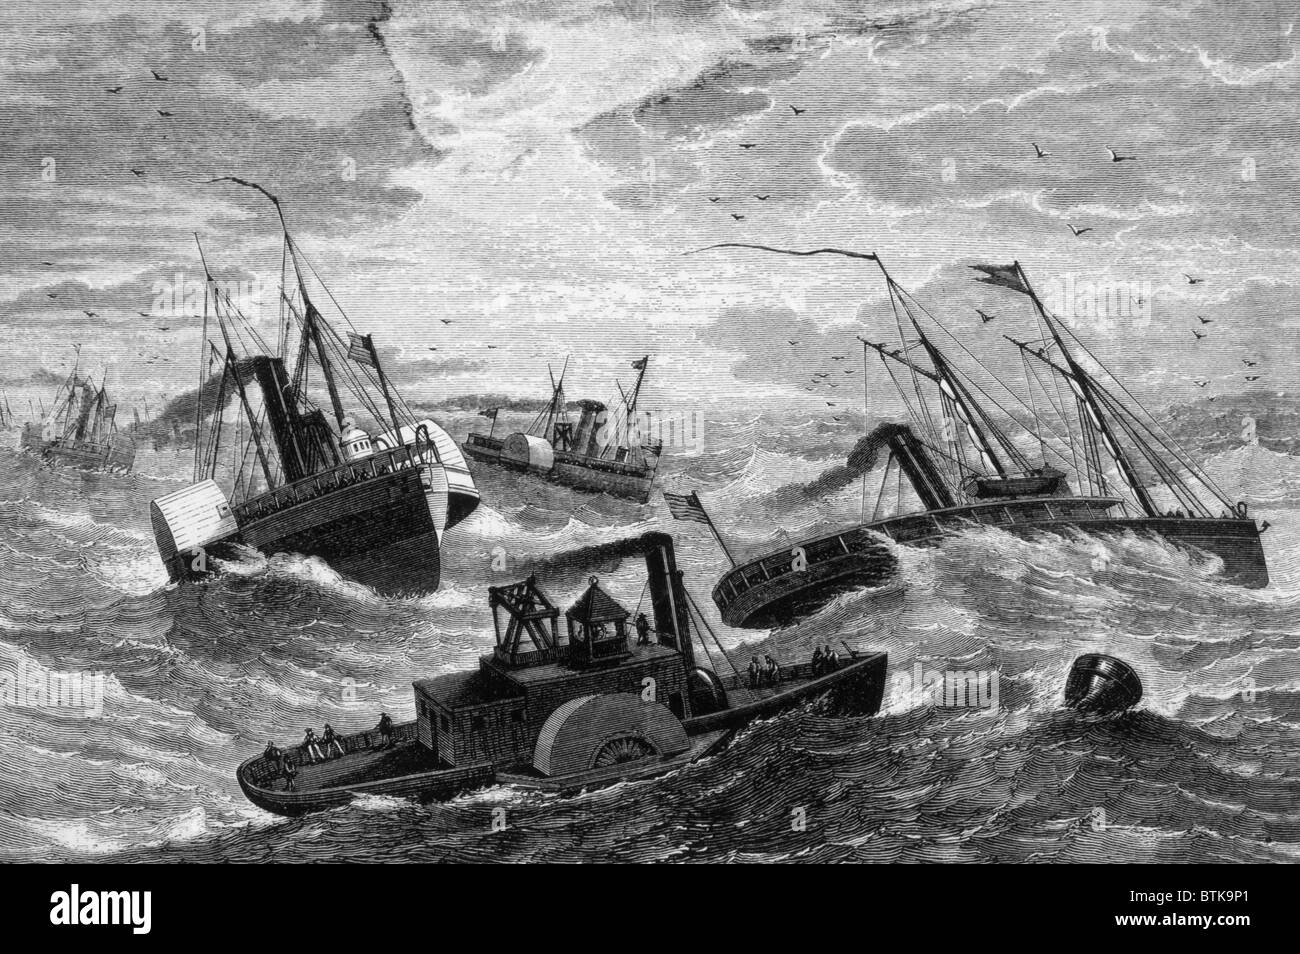 General Ambrose Burnside's expedition crossing Cape Hatteras bar in a heavy sea, 1862 Stock Photo